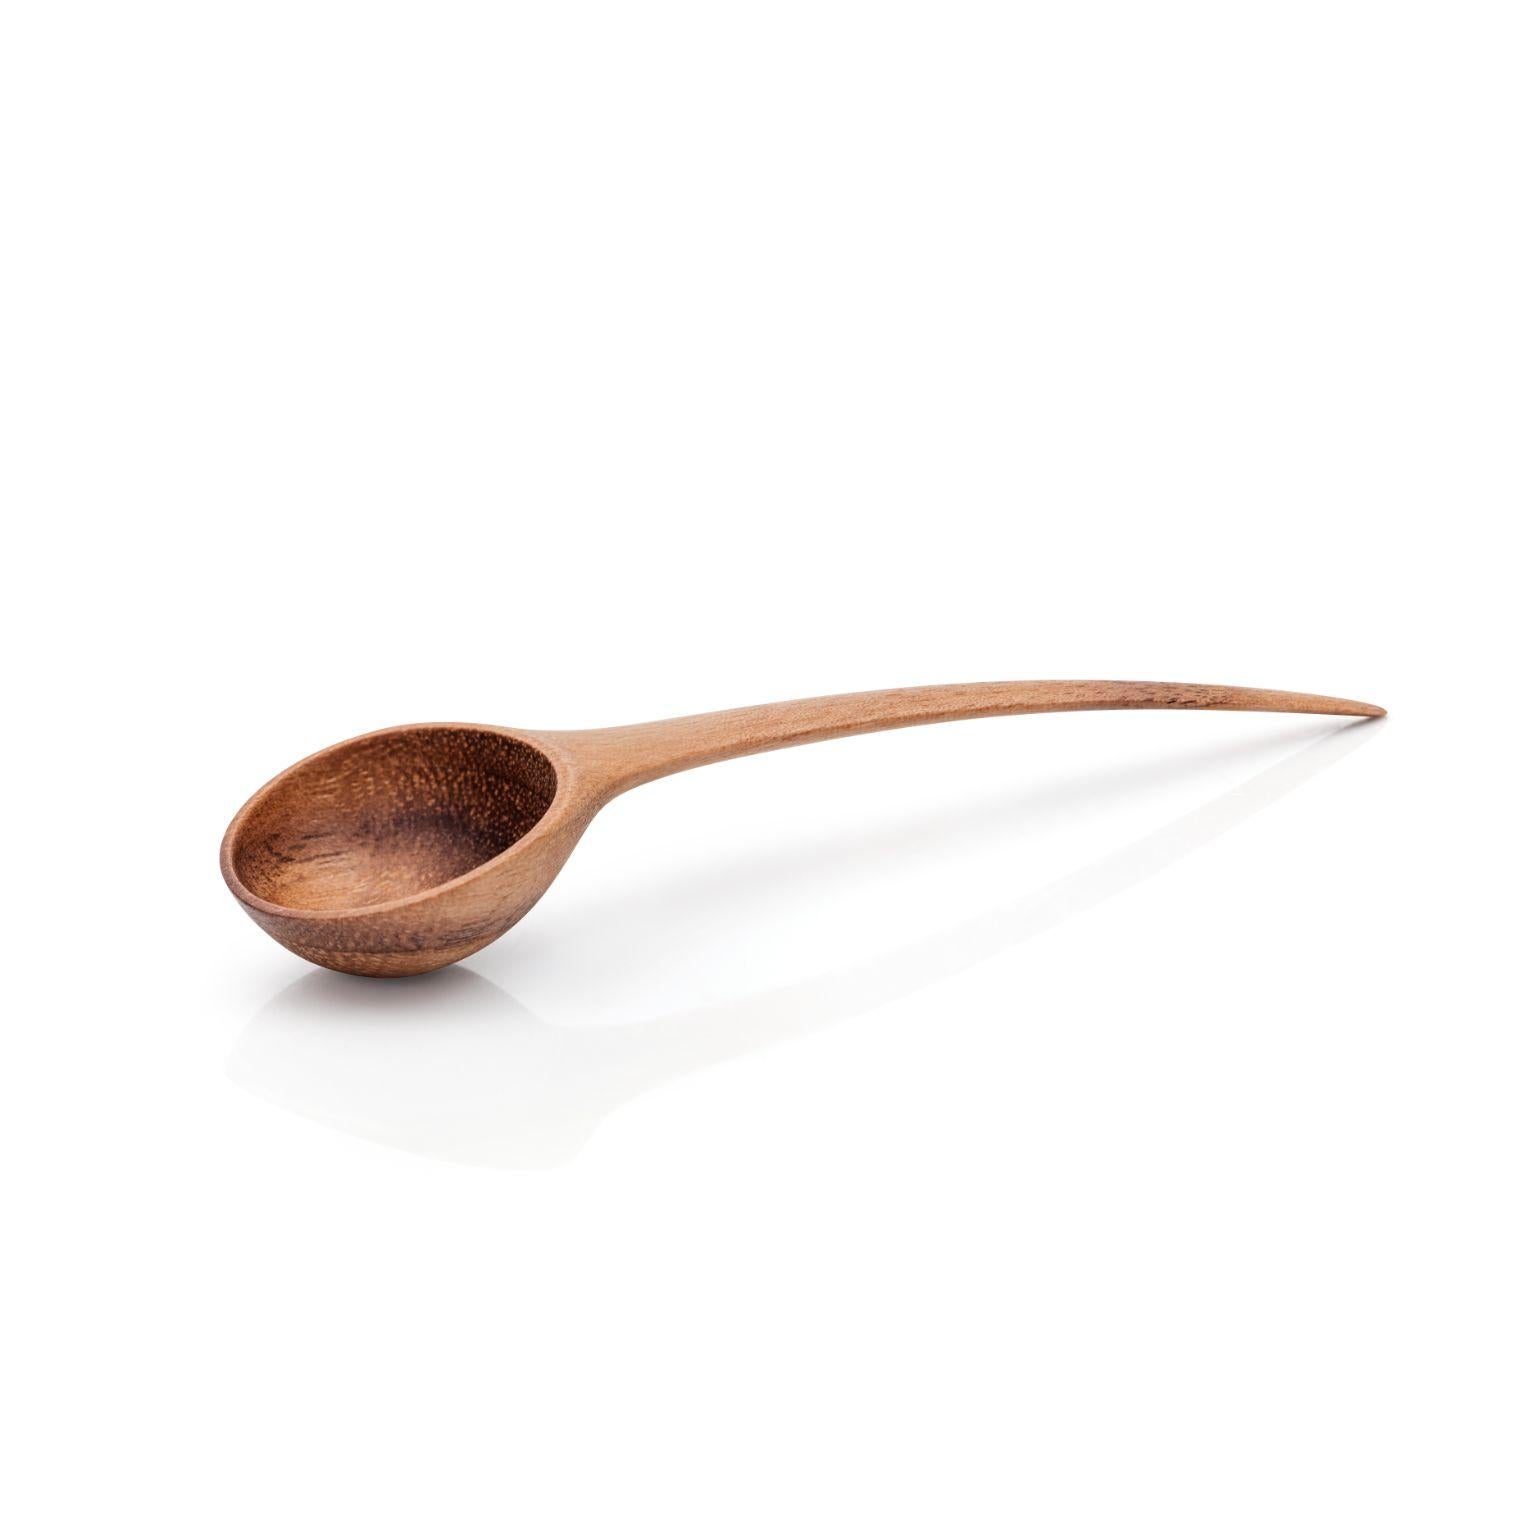 Pisara spoon - small by Antrei Hartikainen
Materials: Walnut, maple, natural oil wax
Dimensions: W 7-10 cm

Also available in three sizes and a variety of woods

This range of small spoons are ideal for serving sugar, salt and other